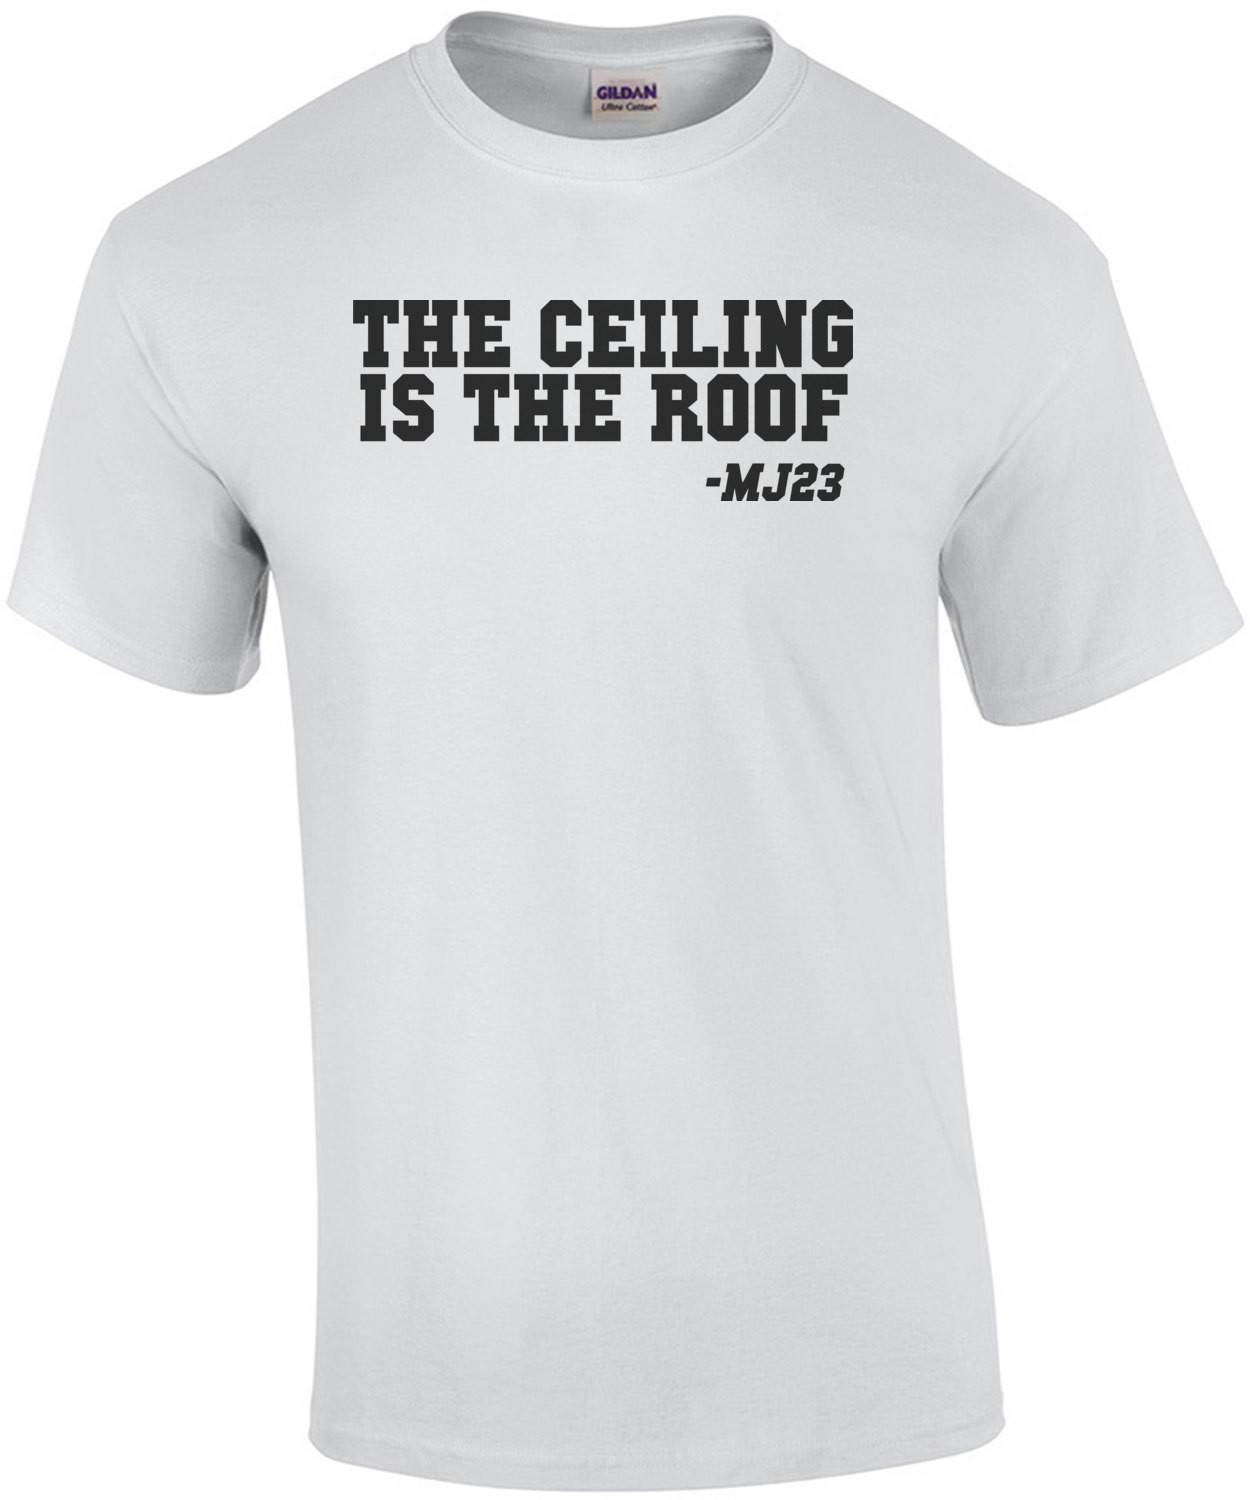 The Ceiling Is The Roof T-Shirt